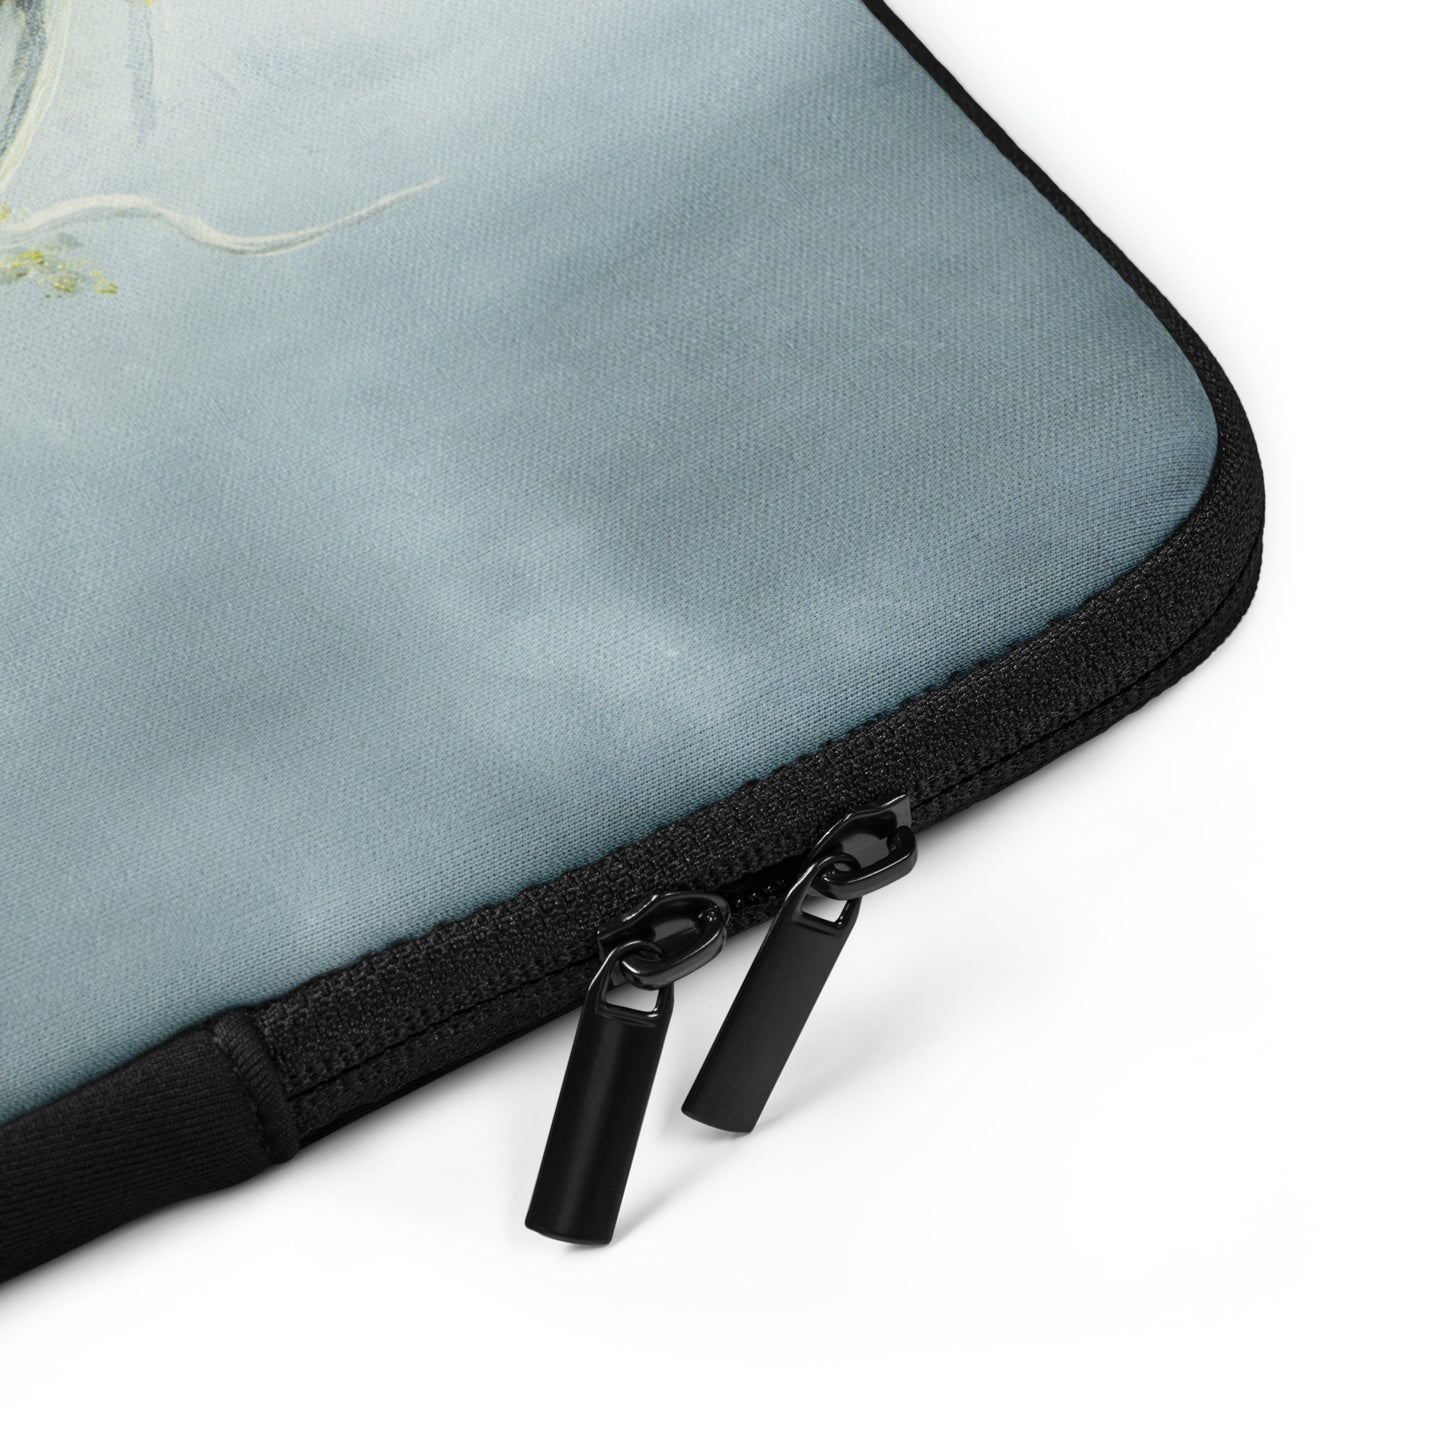 Lord of the Forest - Laptop Sleeve